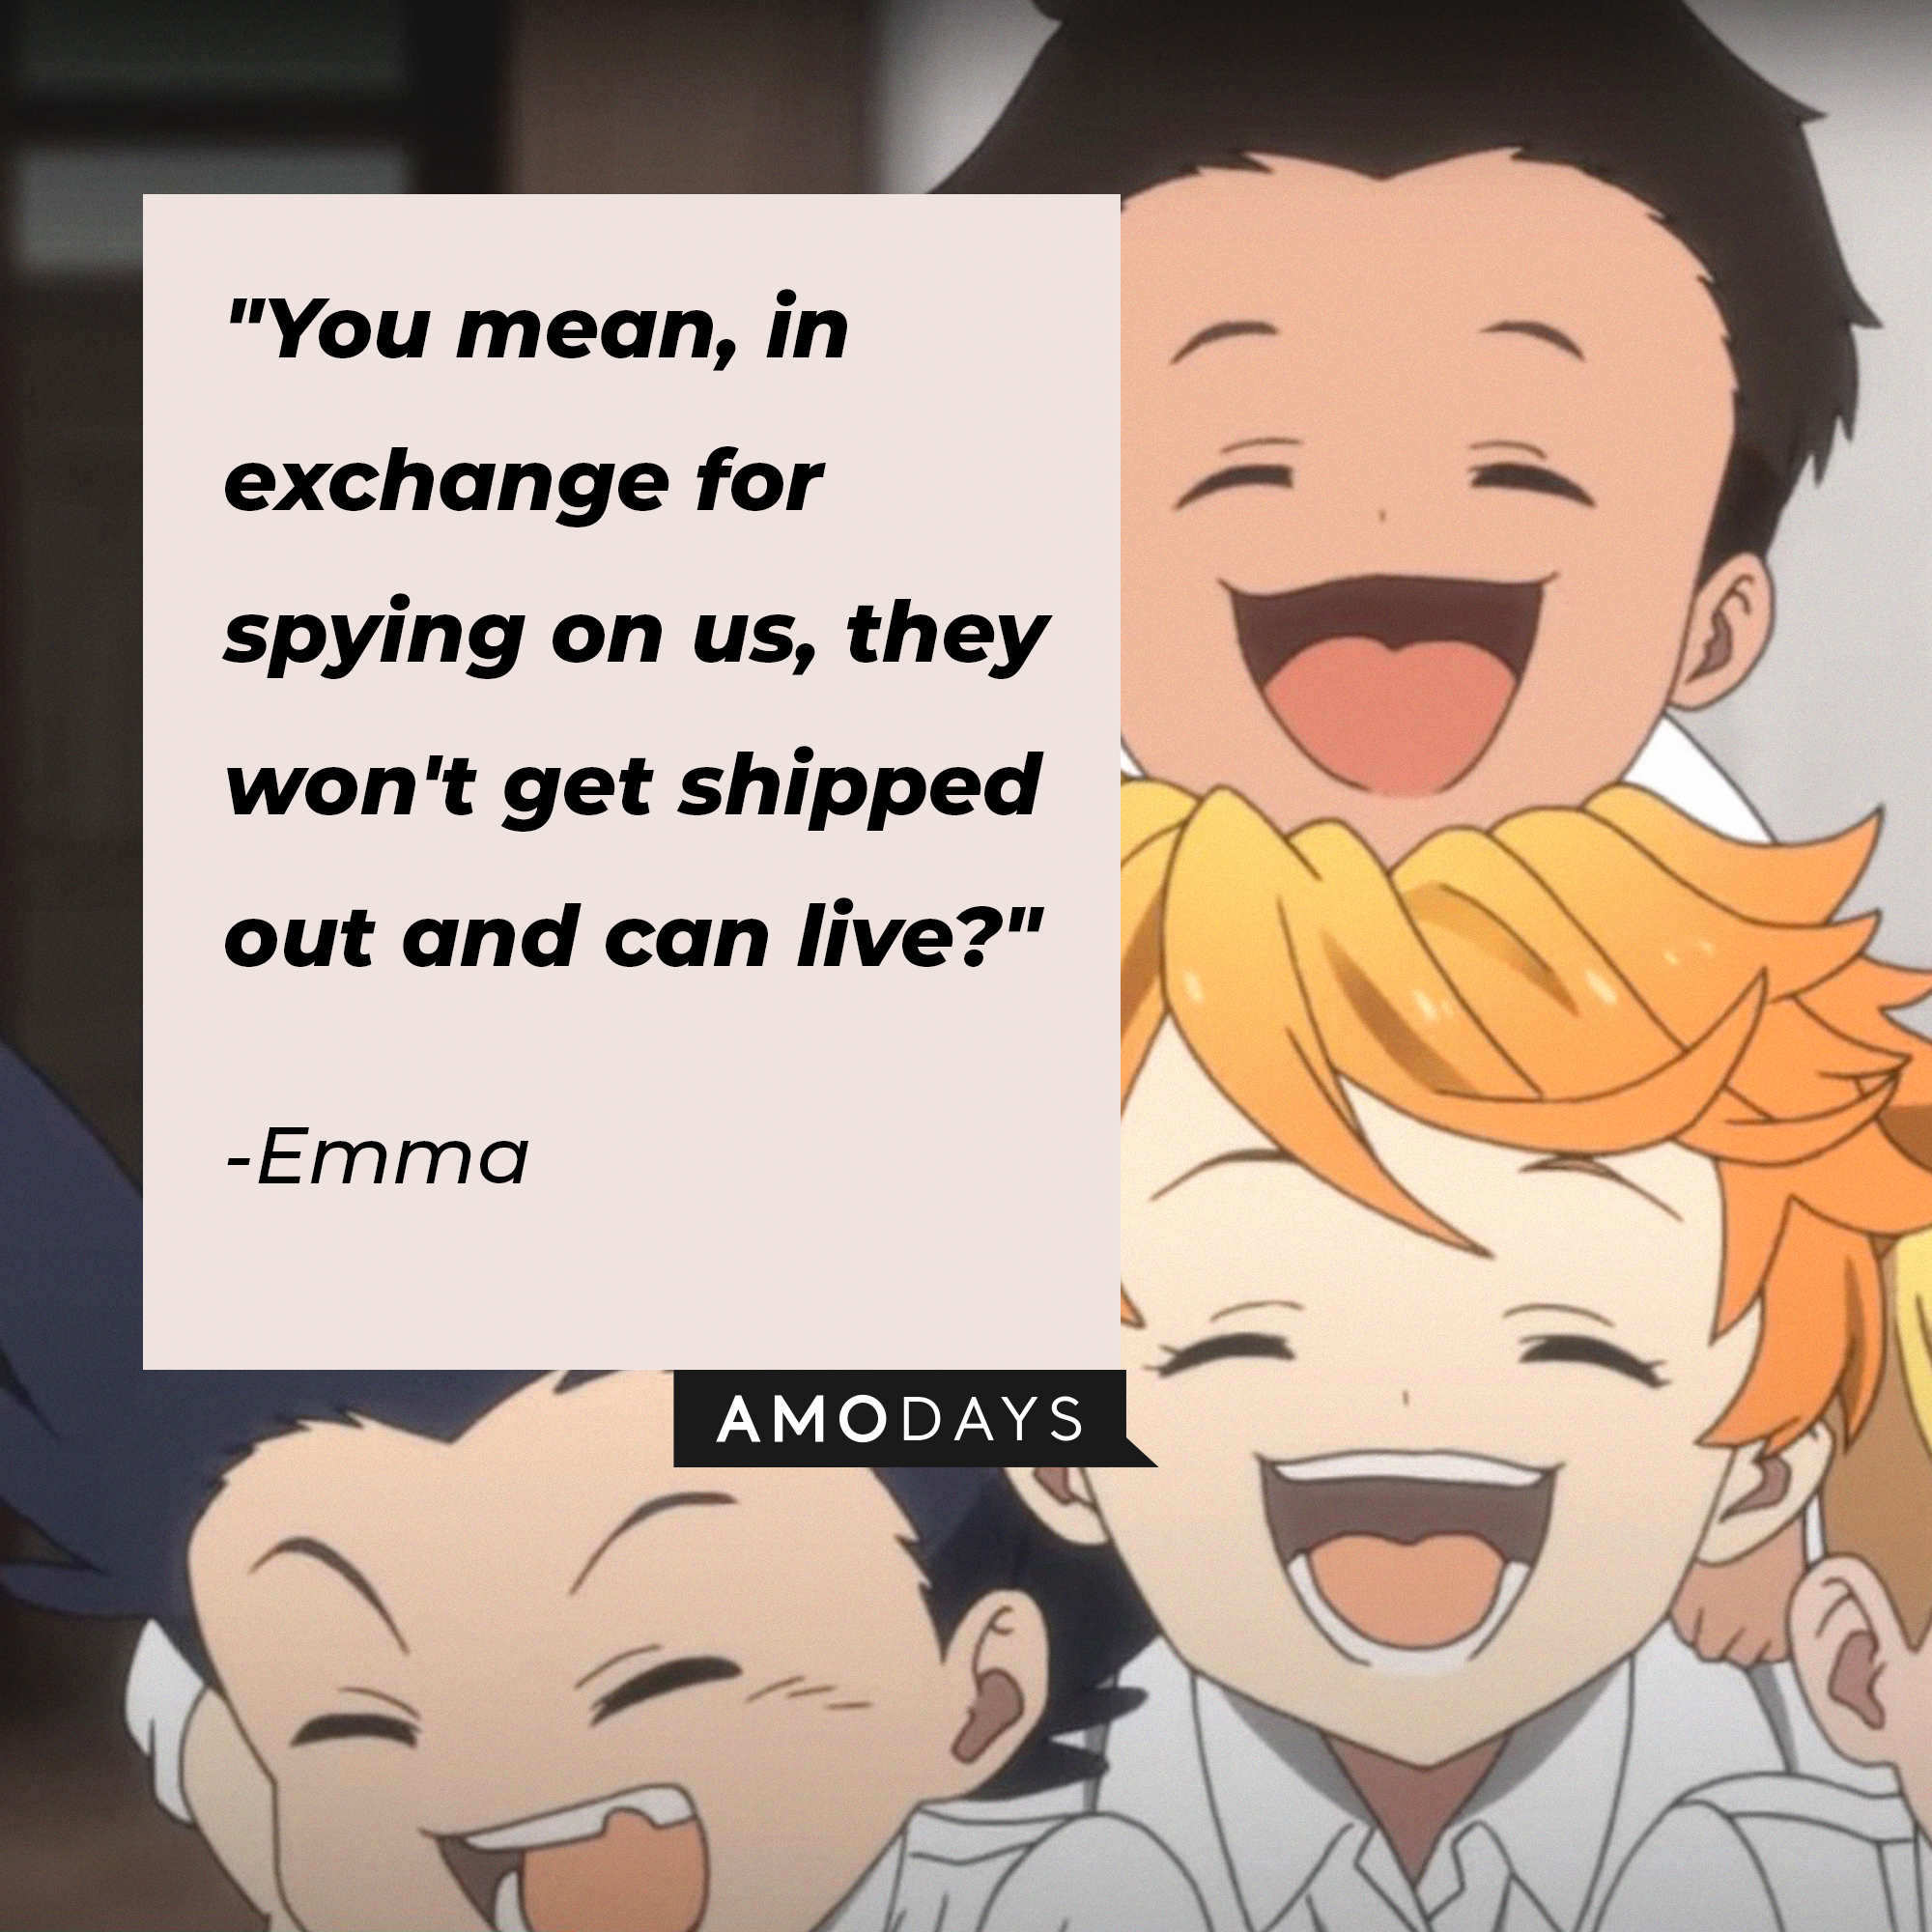 Emma's quote: "You mean, in exchange for spying on us, they won't get shipped out and can live?" | Image: AmoDays